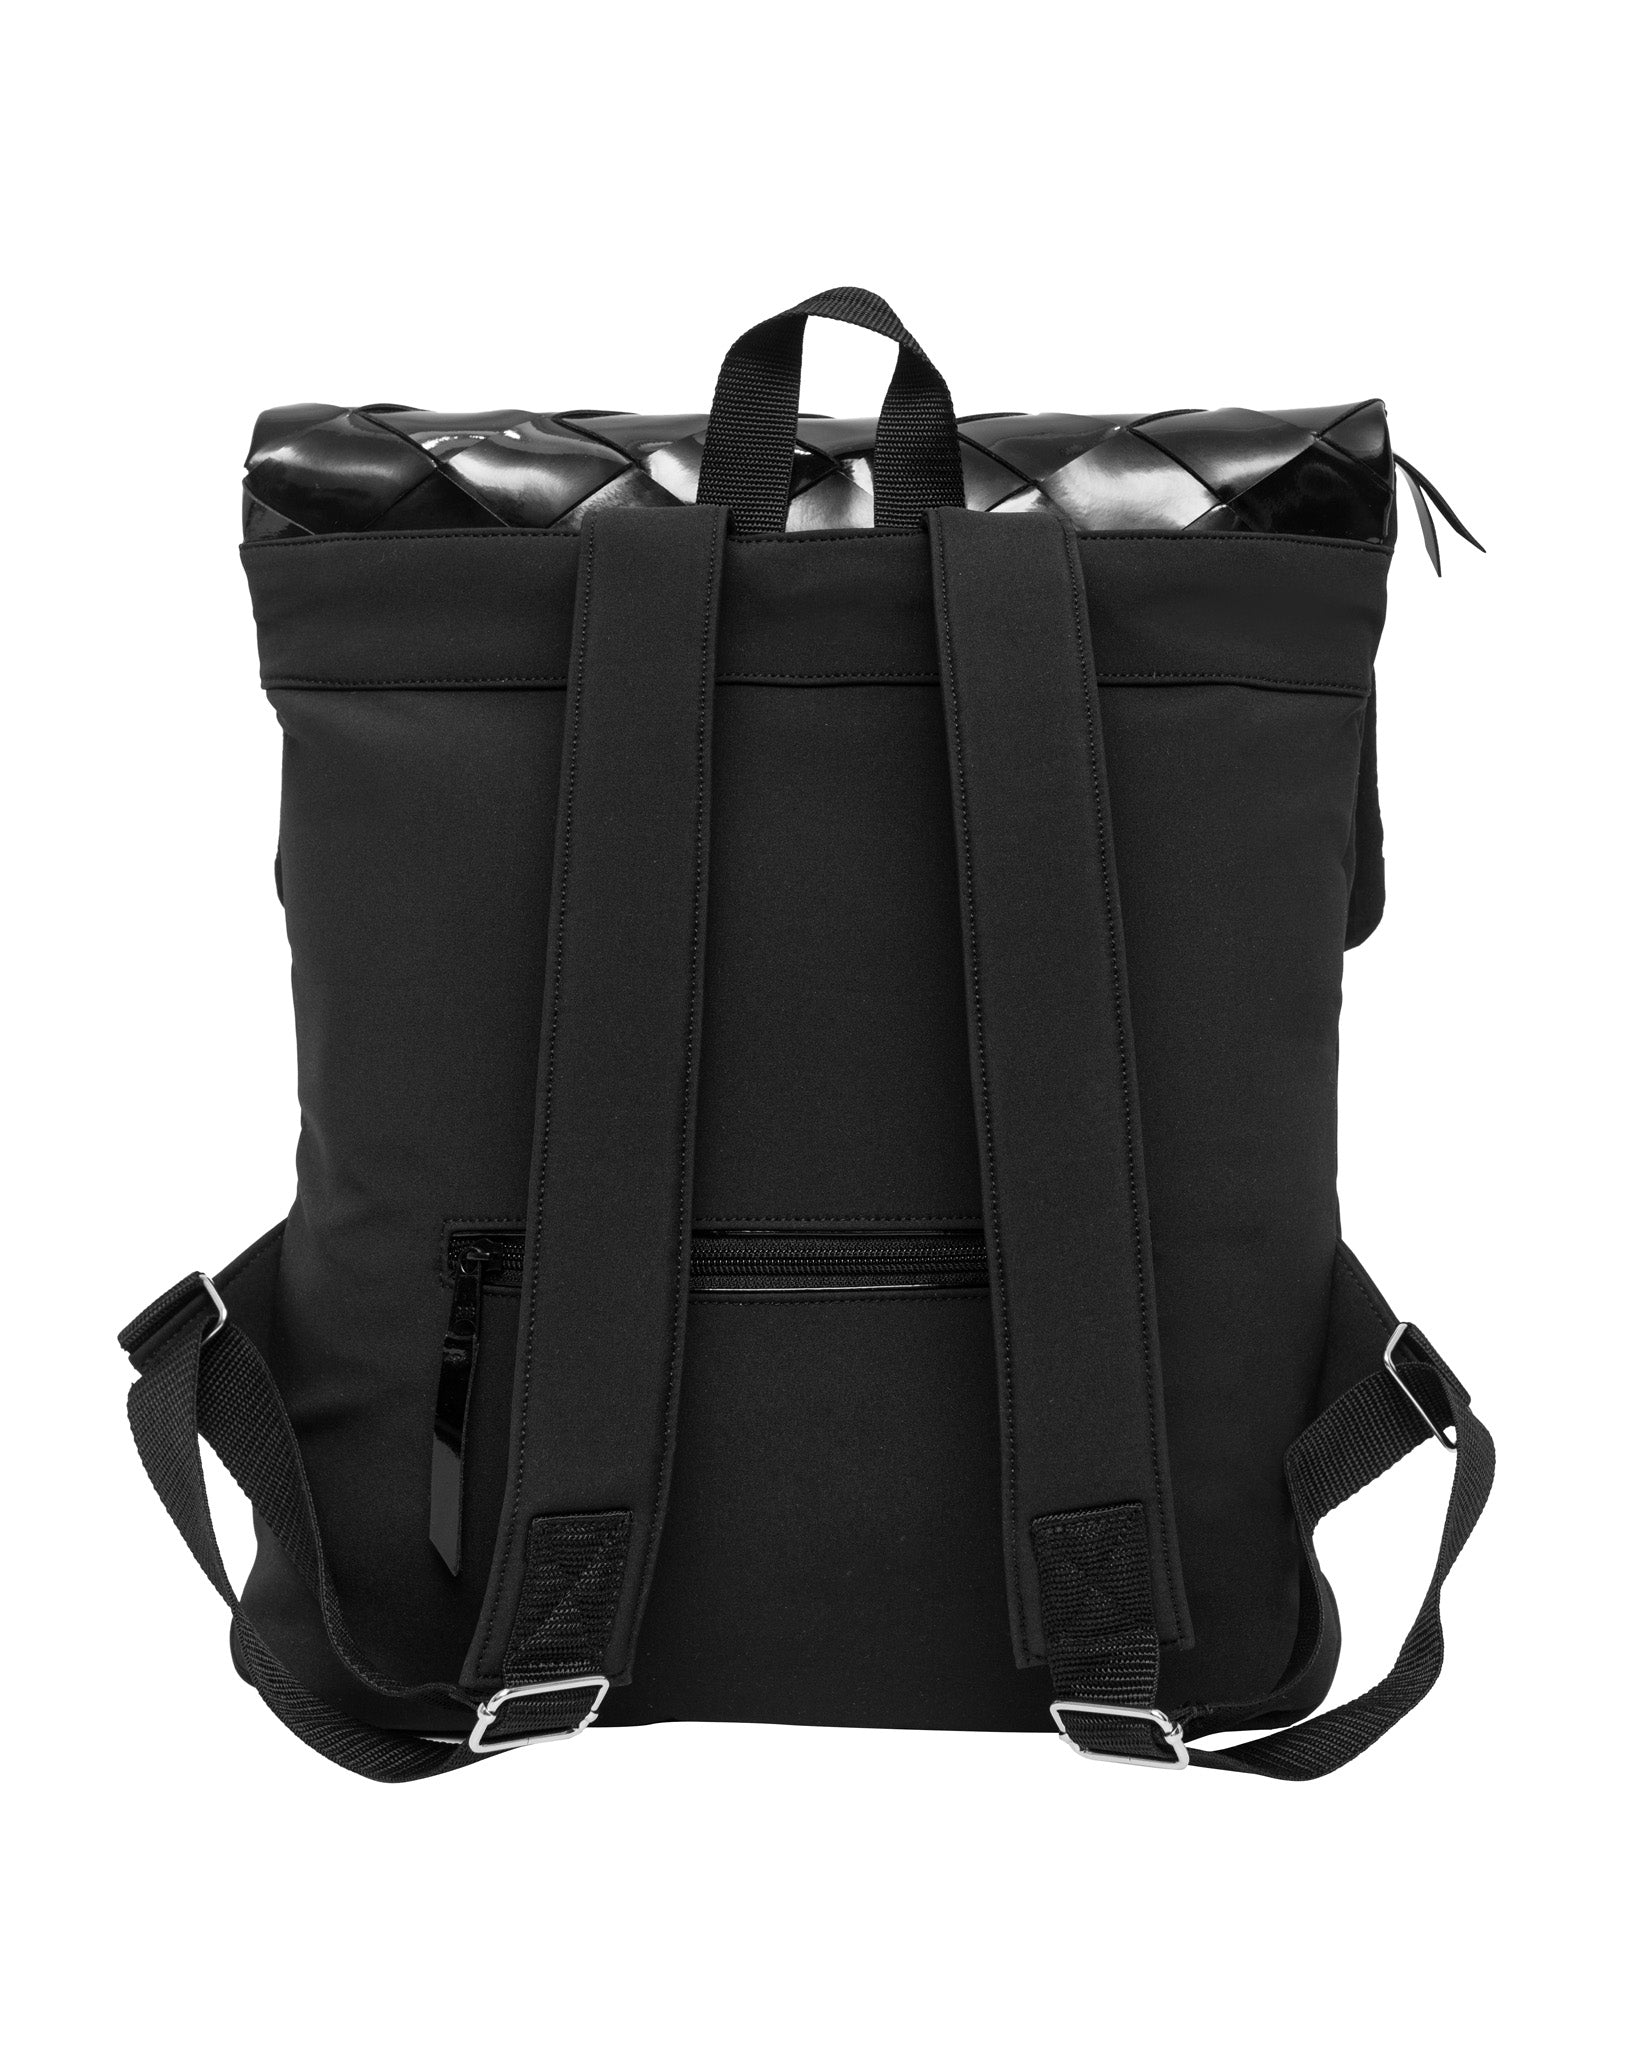 VENOM Backpack-Black Patent Leather - theabags